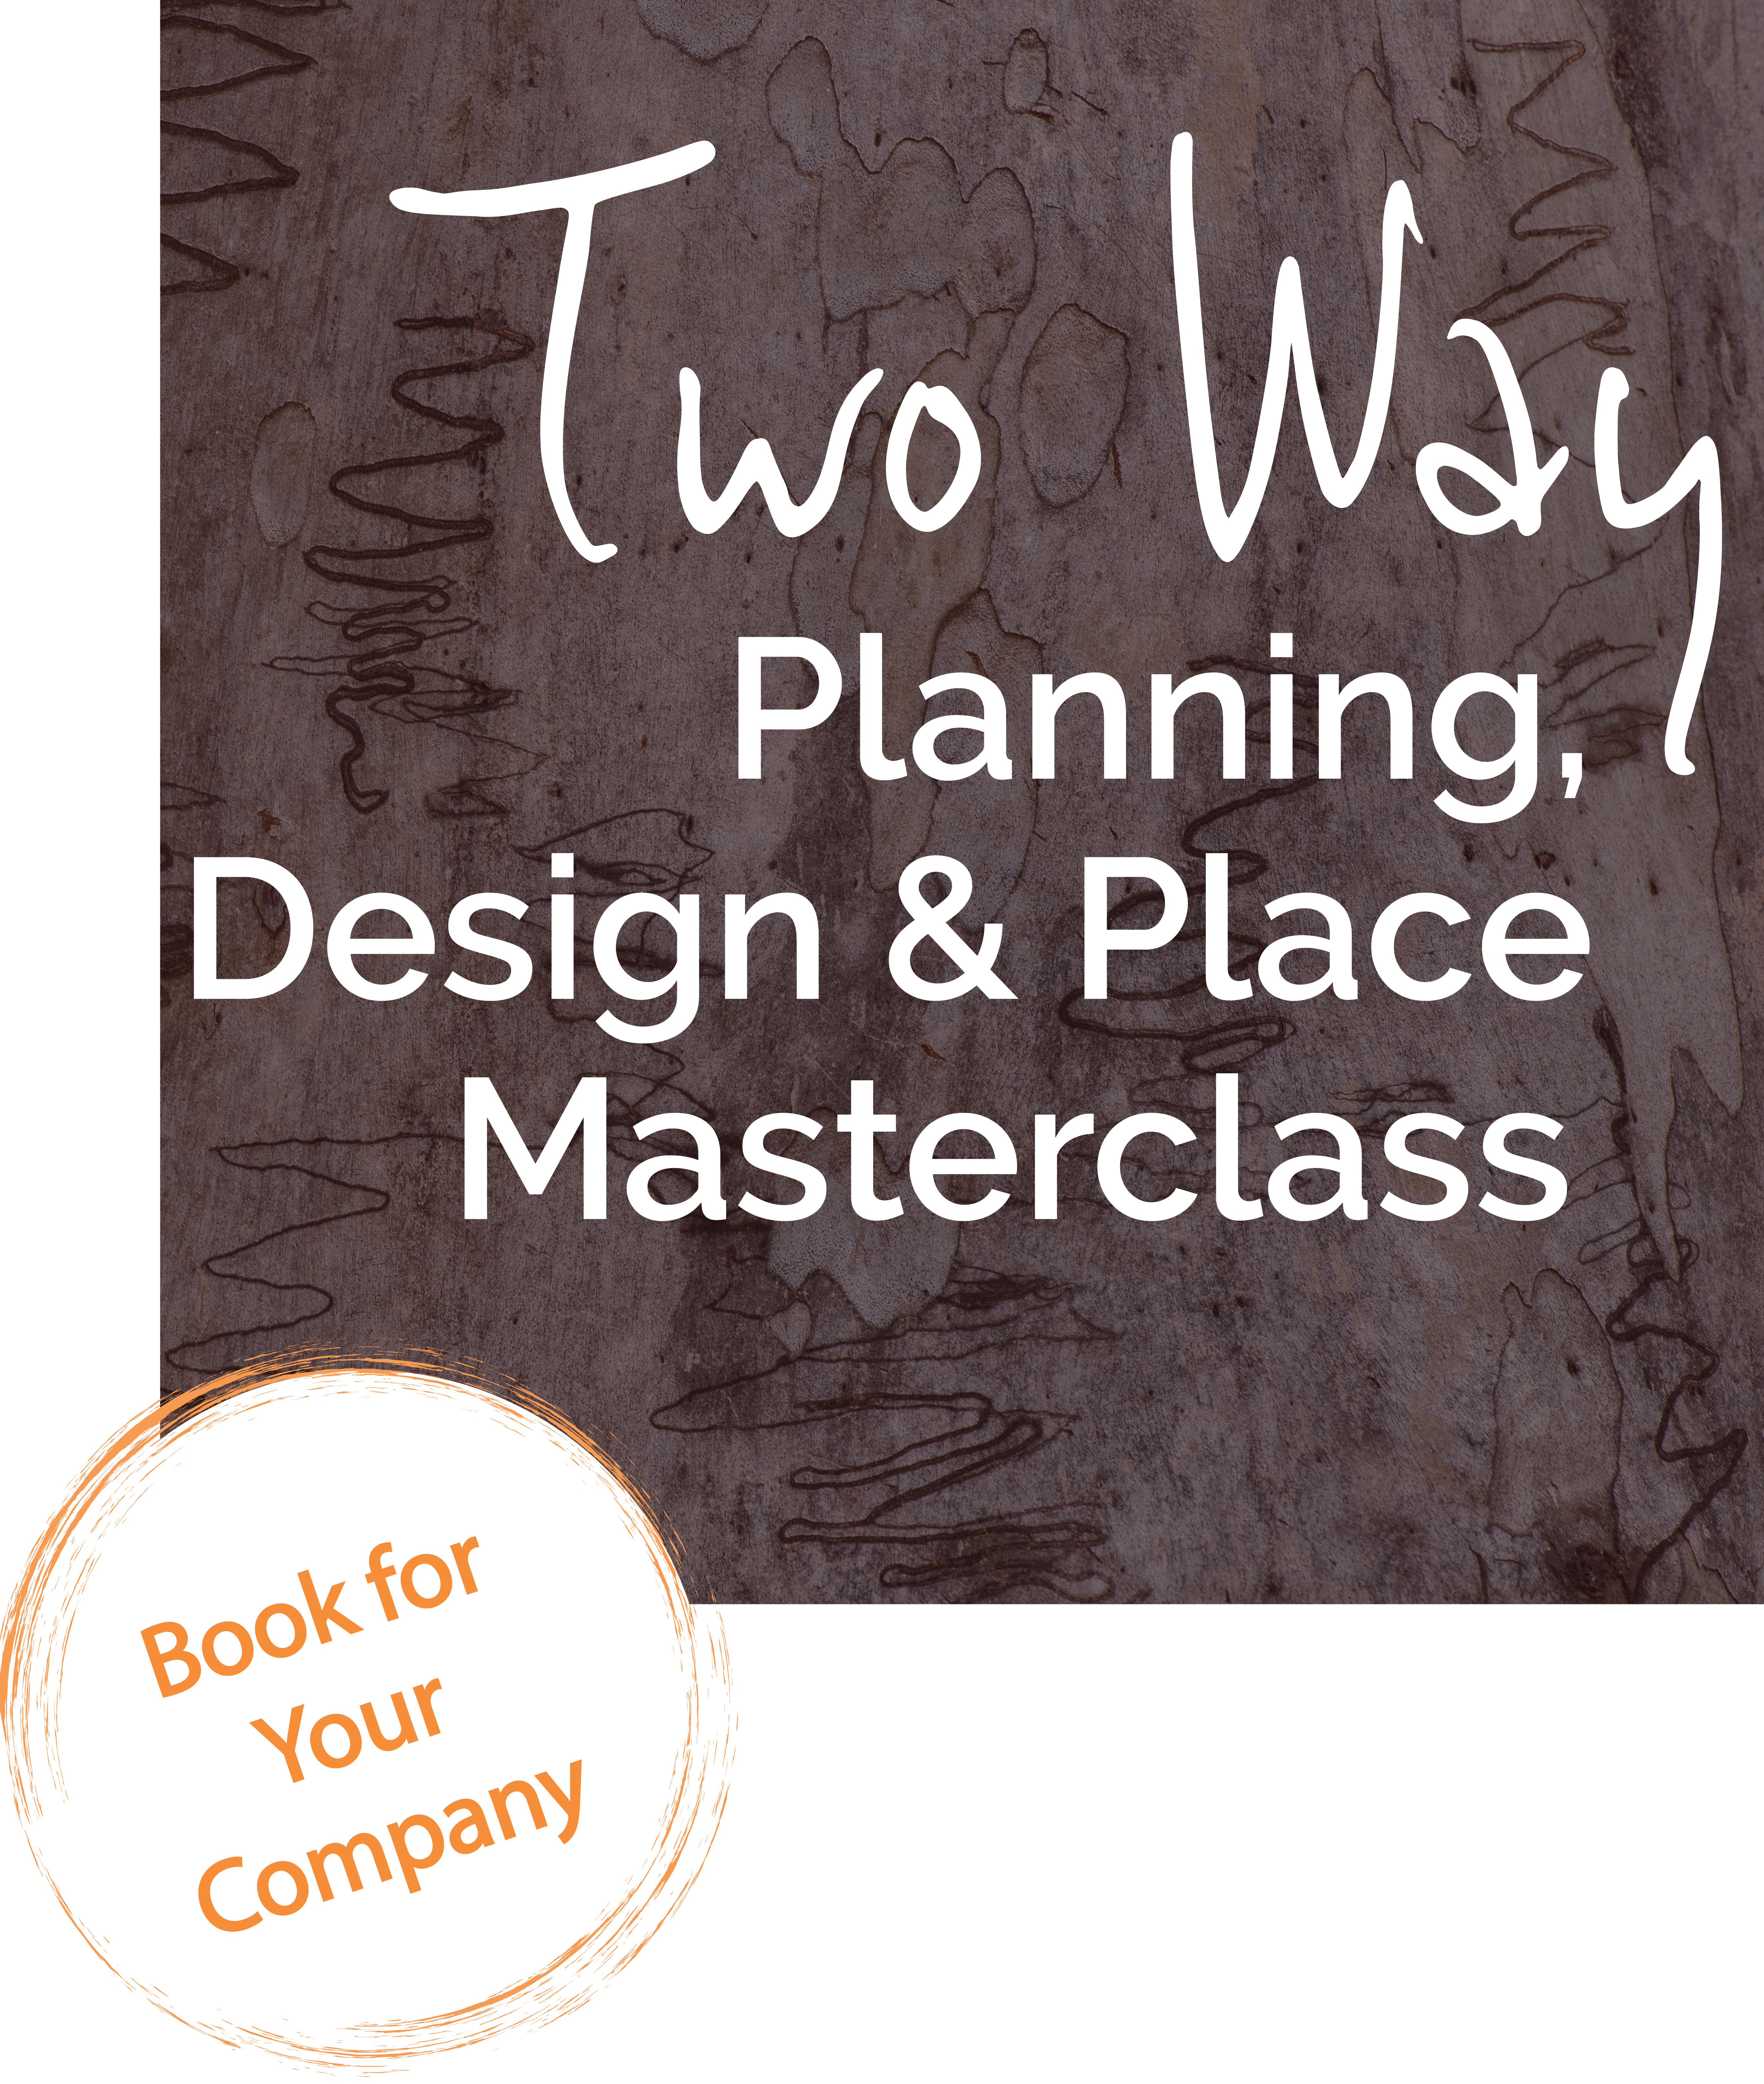 Two Way Planning, Design and Place Masterclass